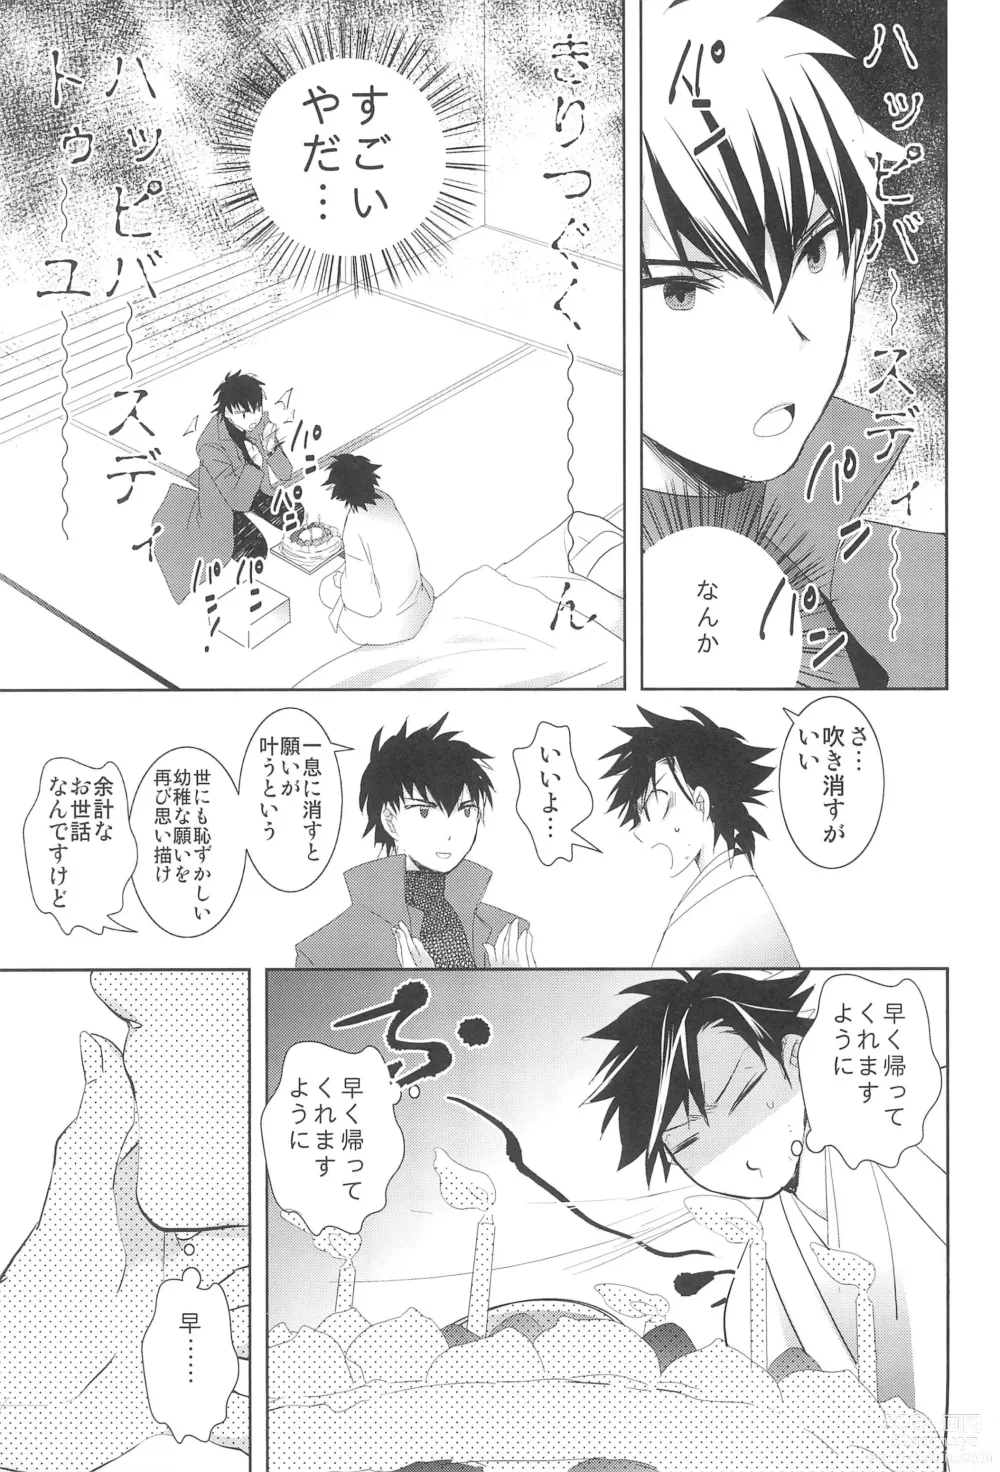 Page 6 of doujinshi Strawberry on the birthdaycakes